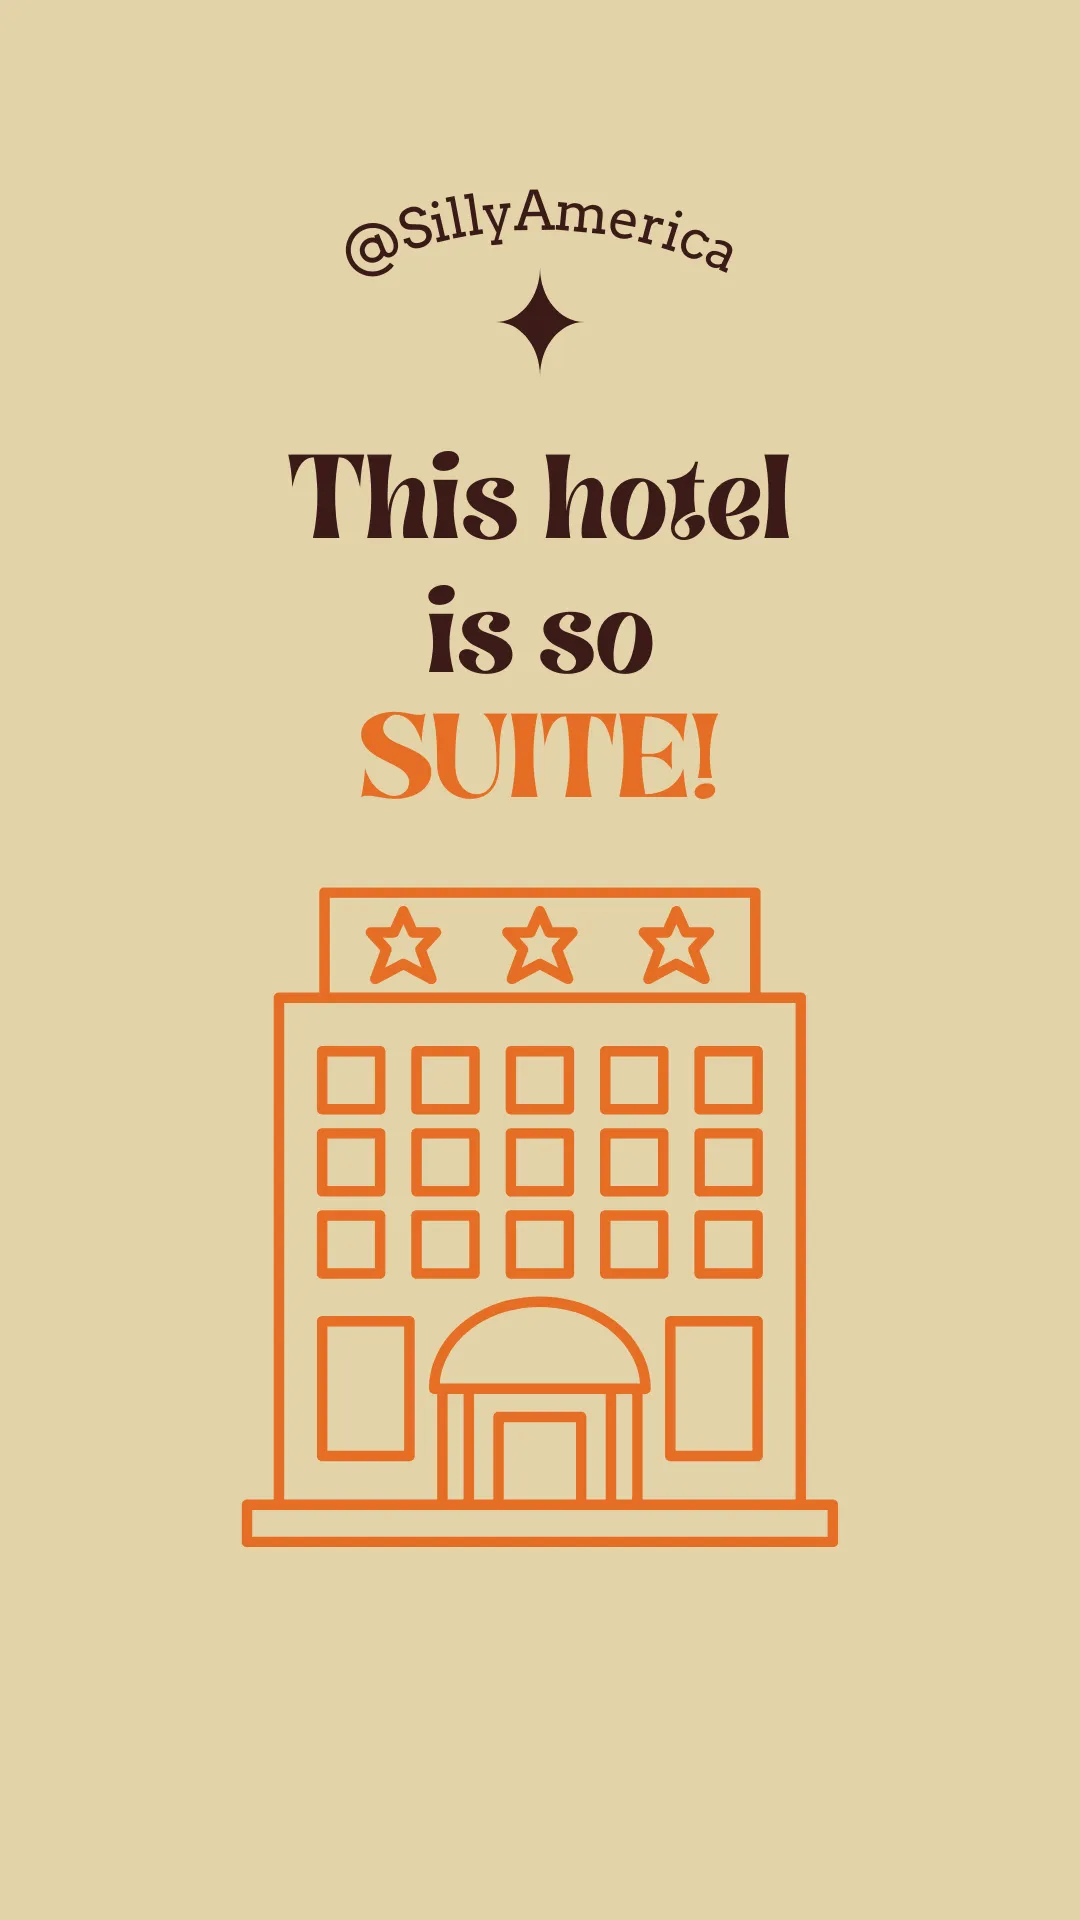 16 Funny Hotel Puns for Social Media - This hotel is so SUITE!